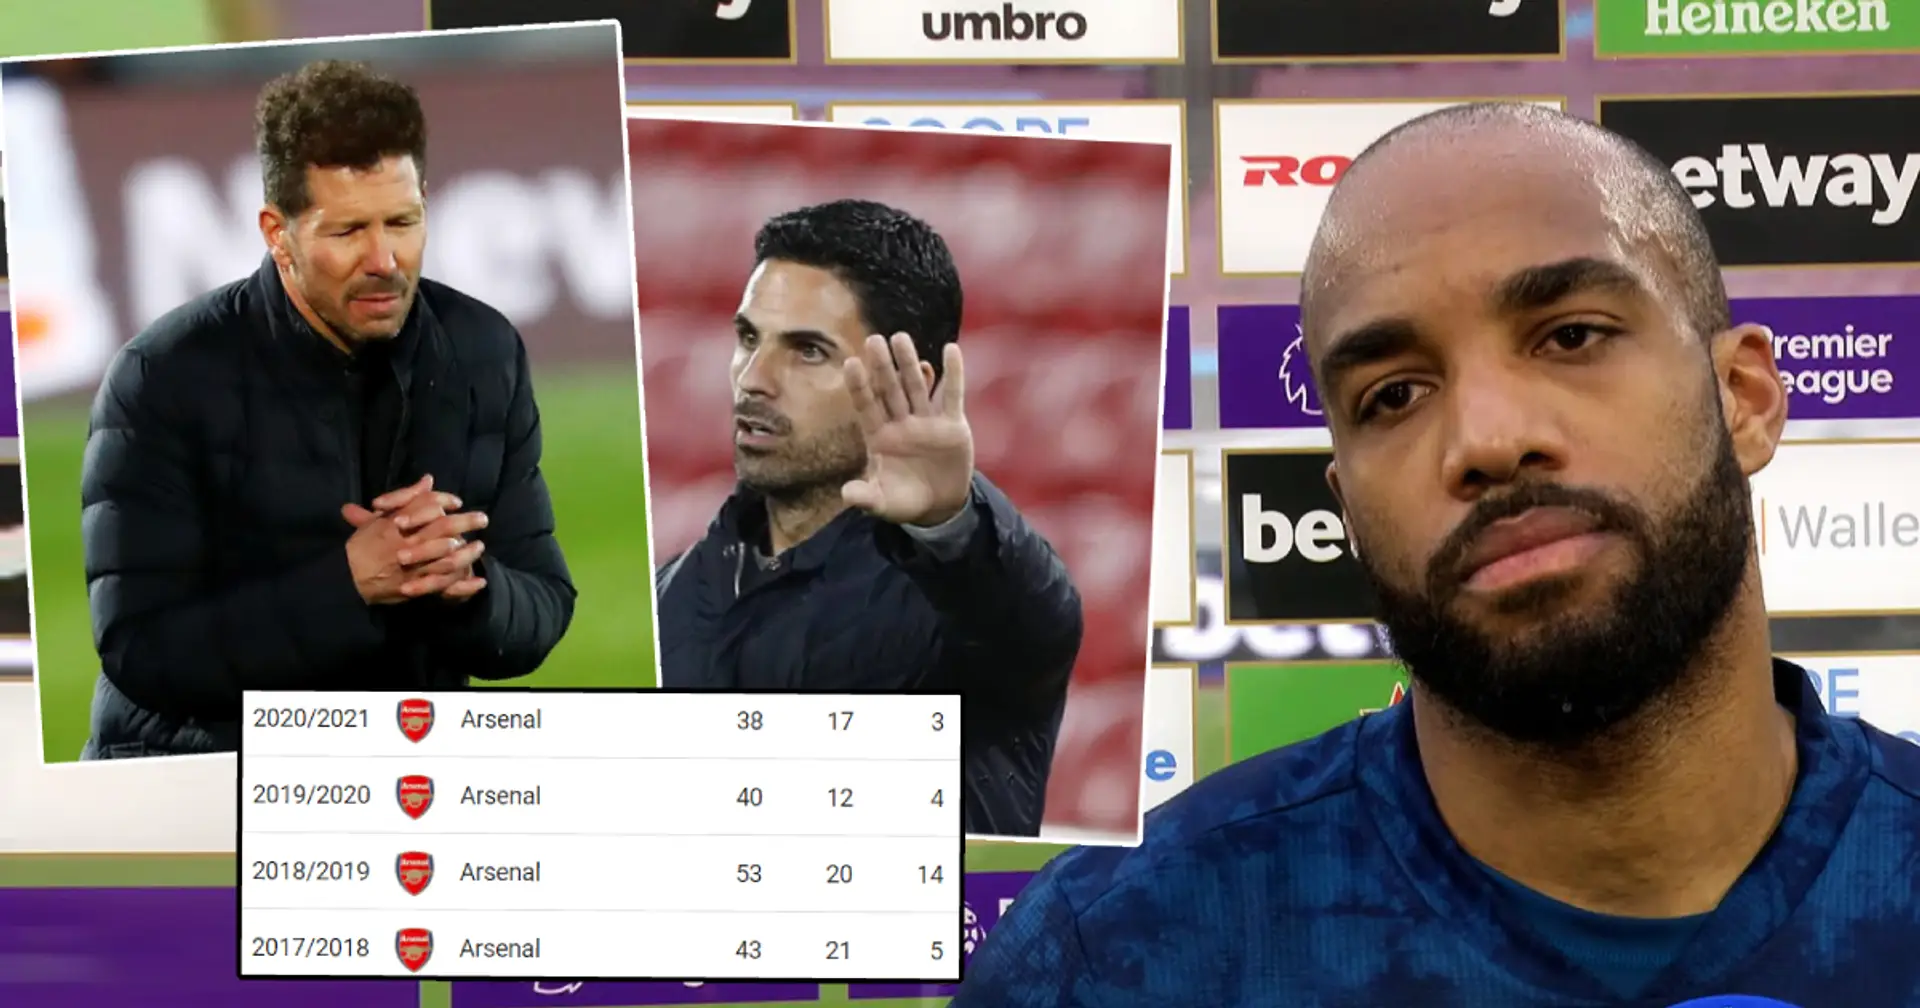 Lacazette's future at Arsenal – keep or sell? Full analysis, 2 scenarios, 3 big verdicts from our editors